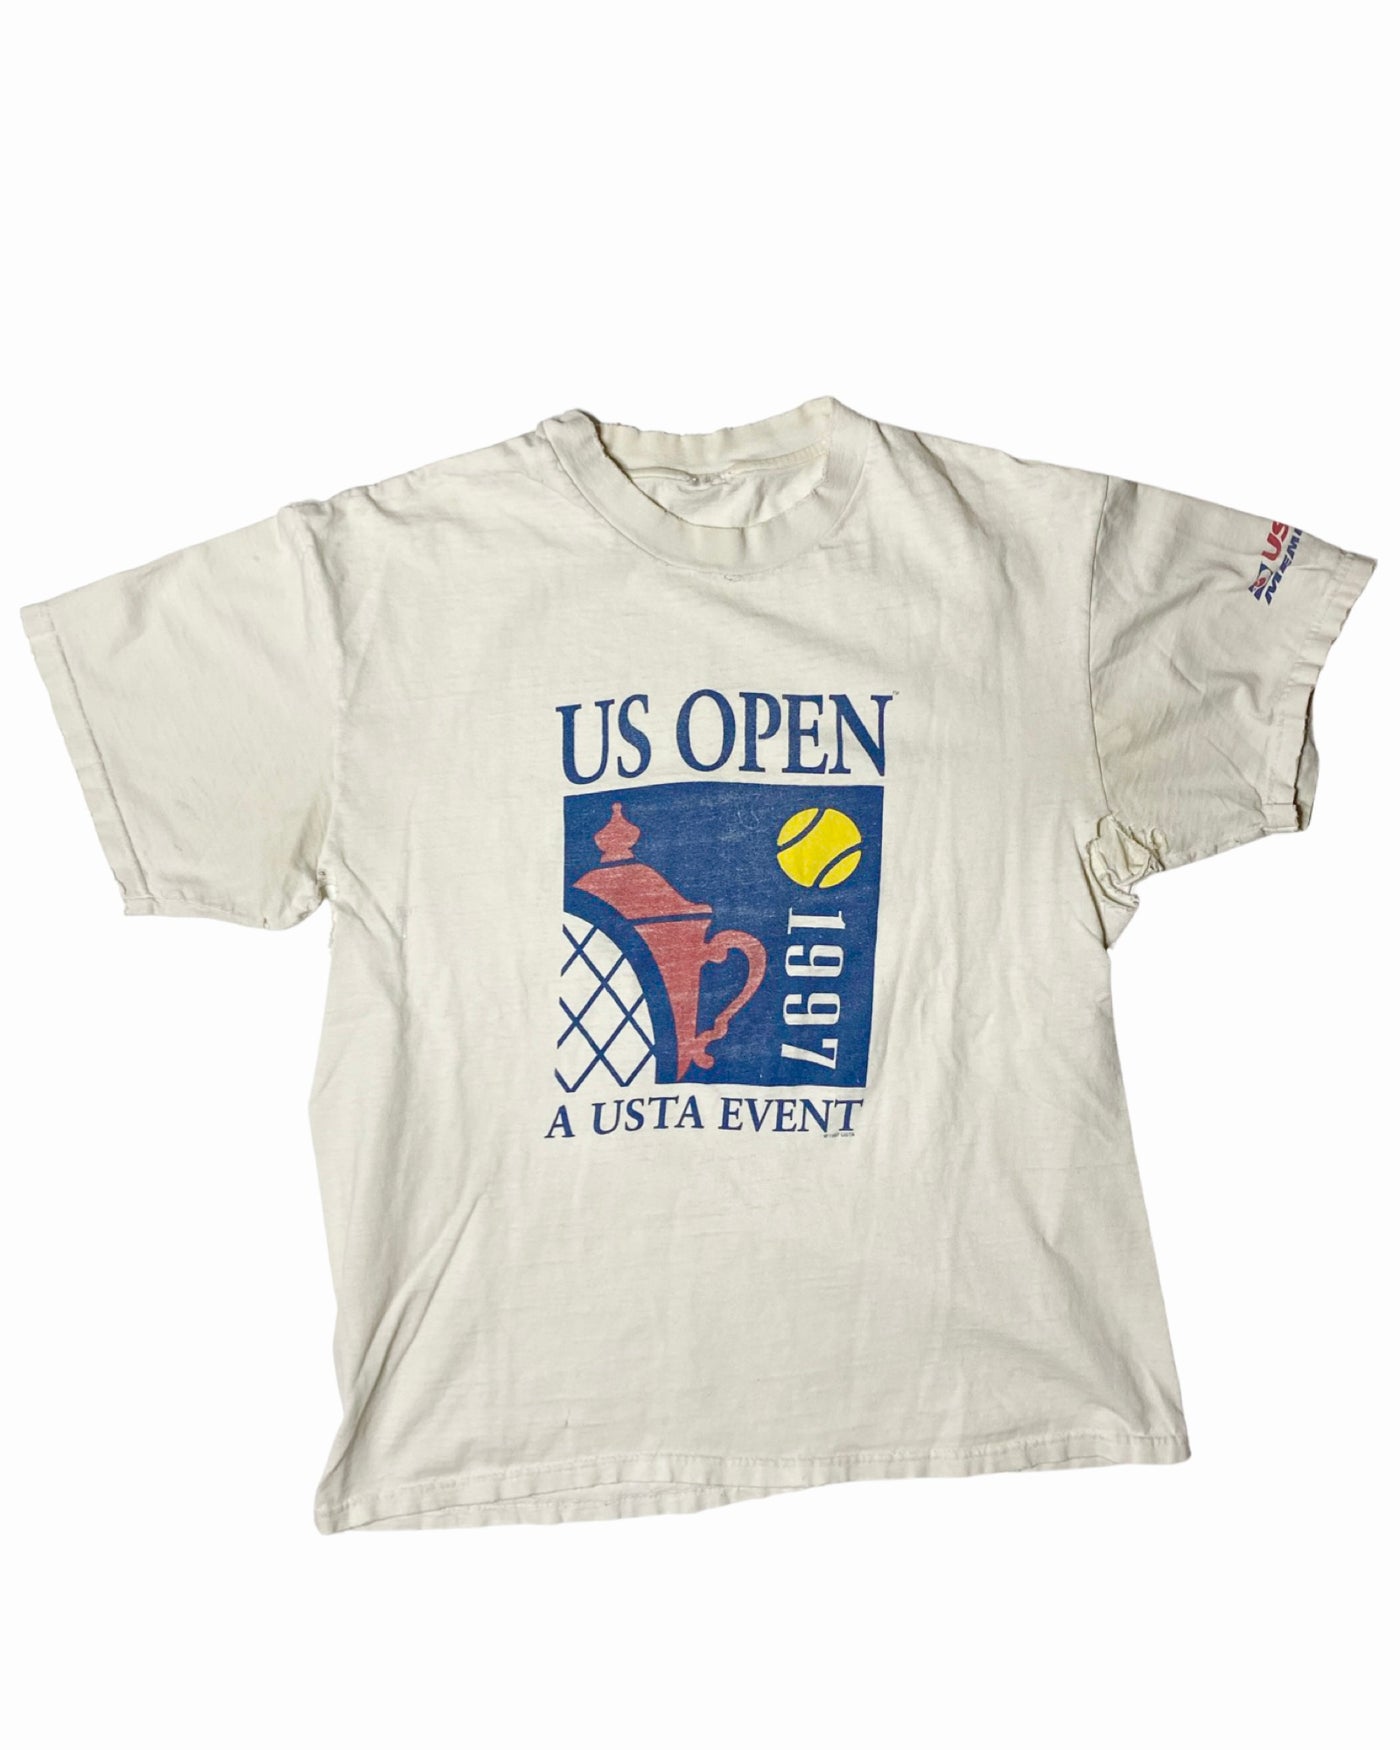 Vintage 1997 Distressed US Open T-Shirt